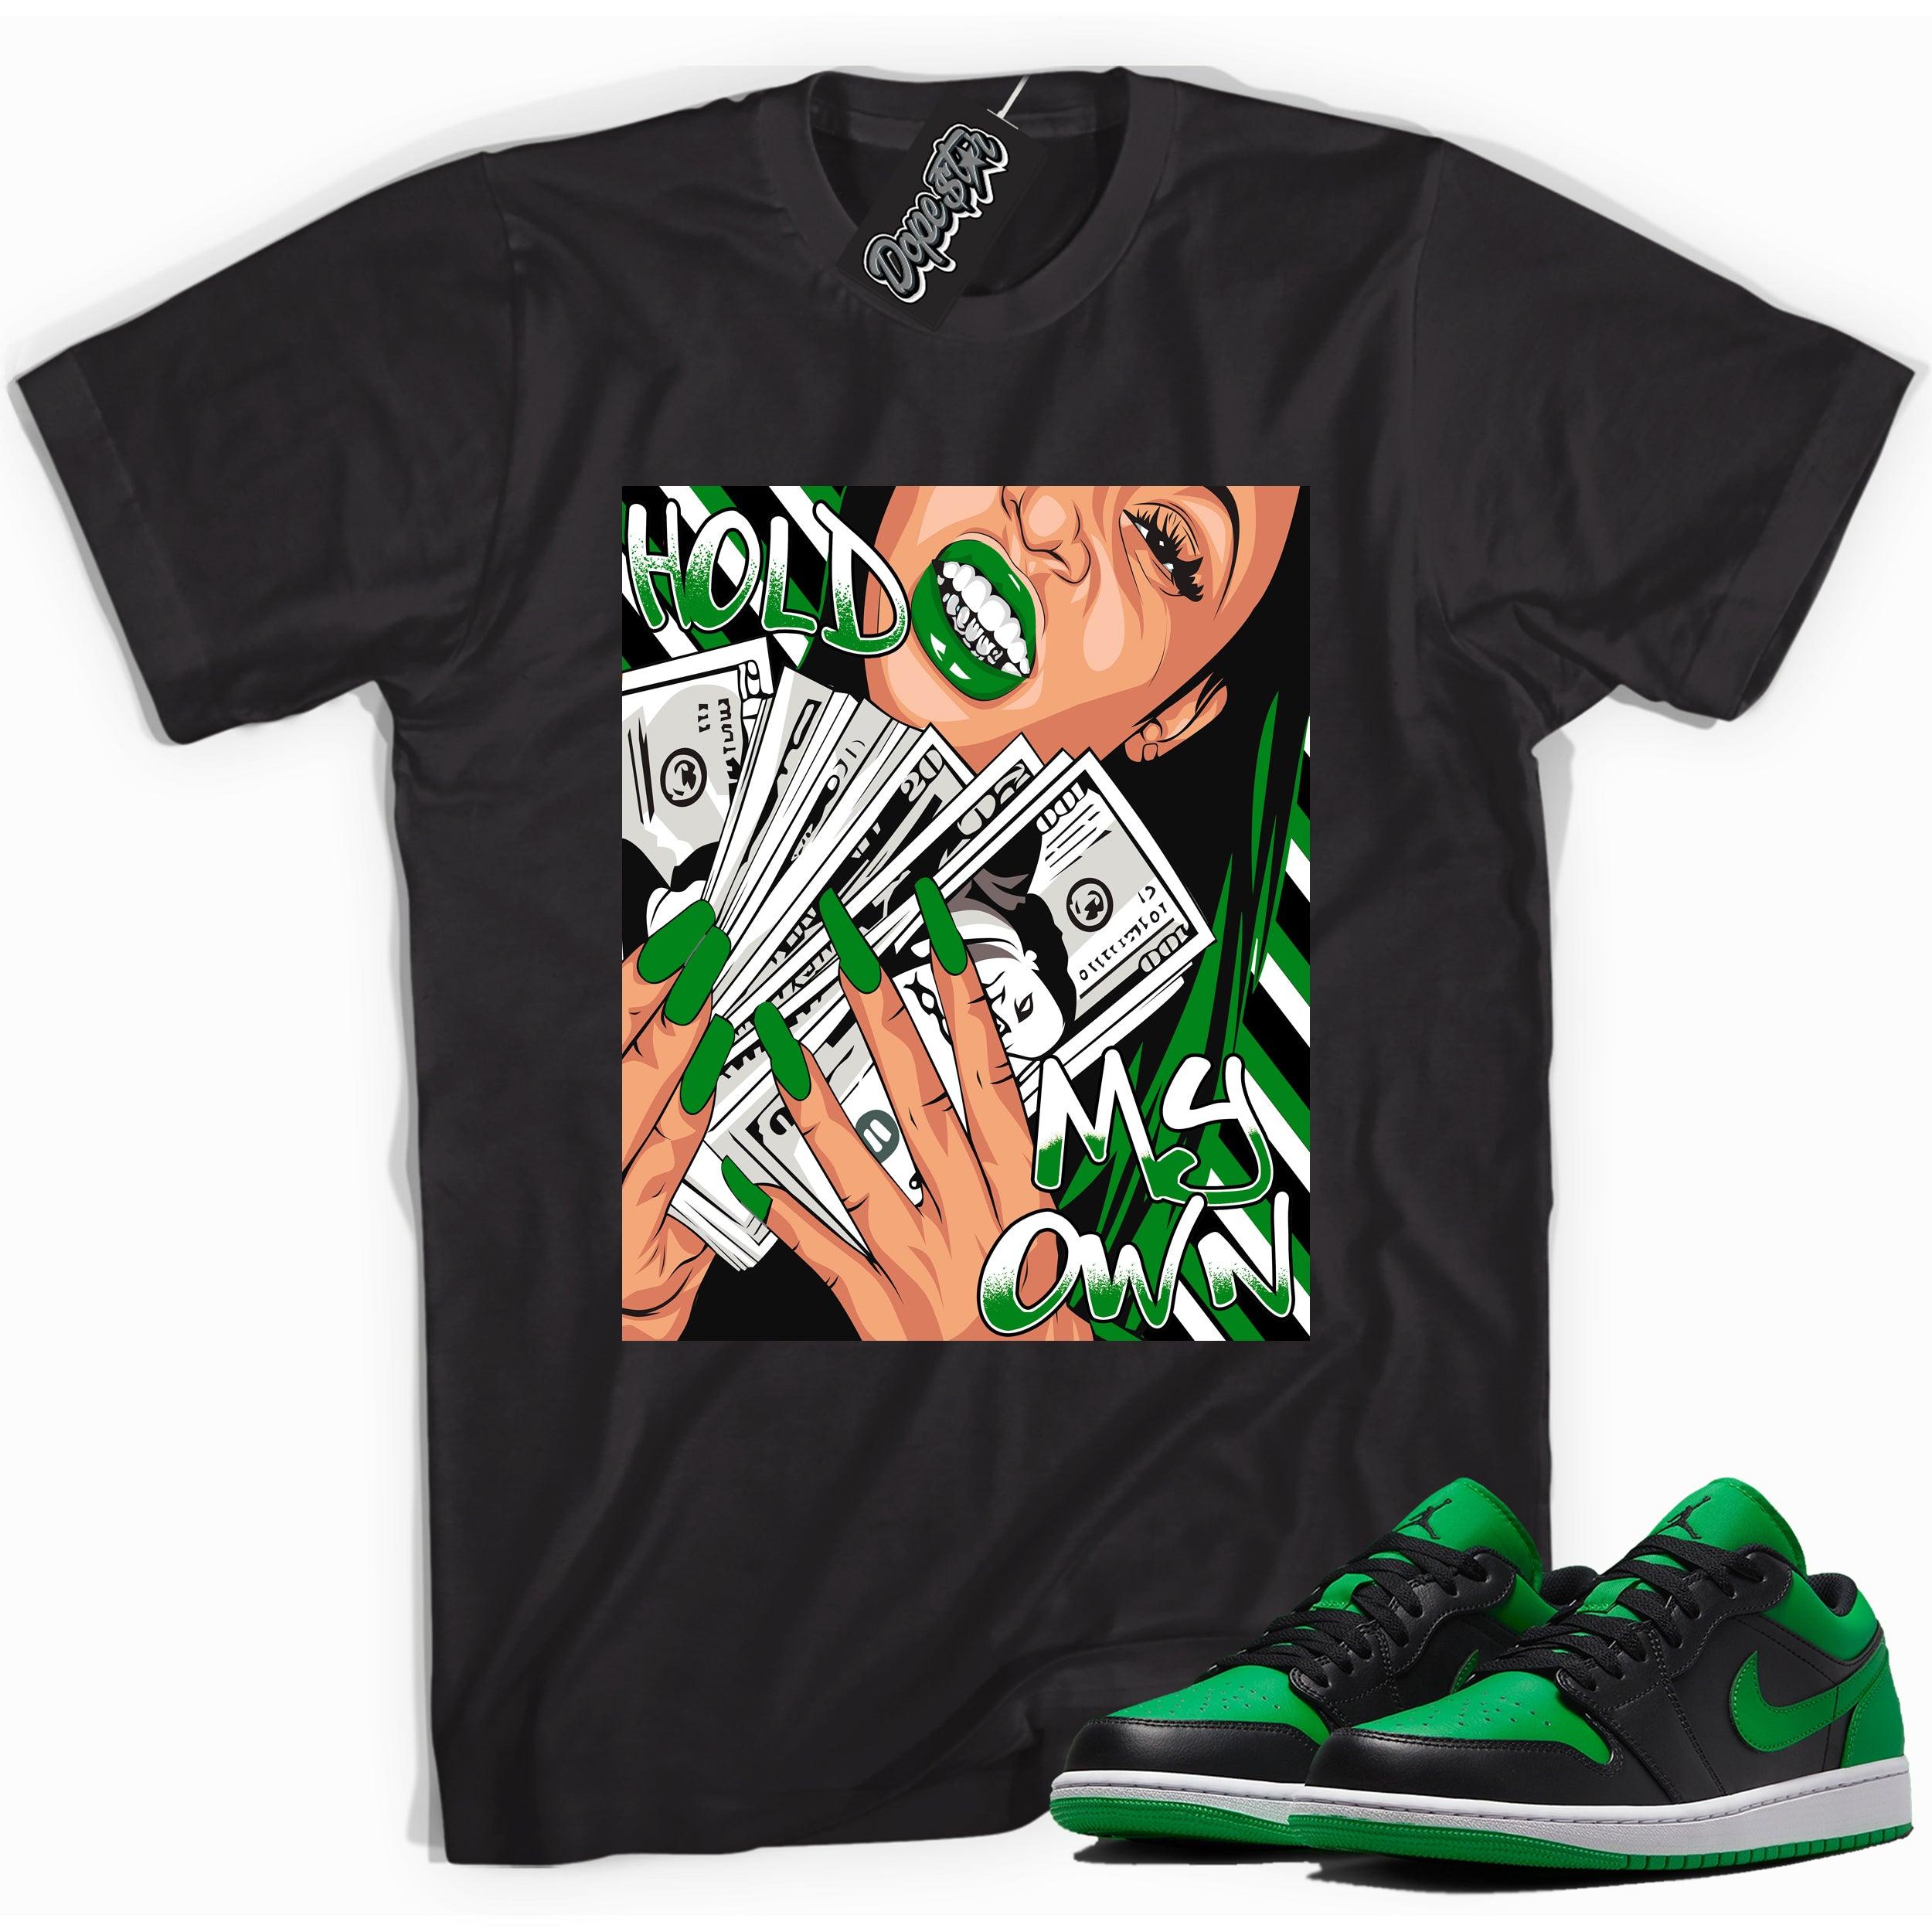 Cool black graphic tee with 'Hold My Own' print, that perfectly matches Air Jordan 1 Low Lucky Green sneakers